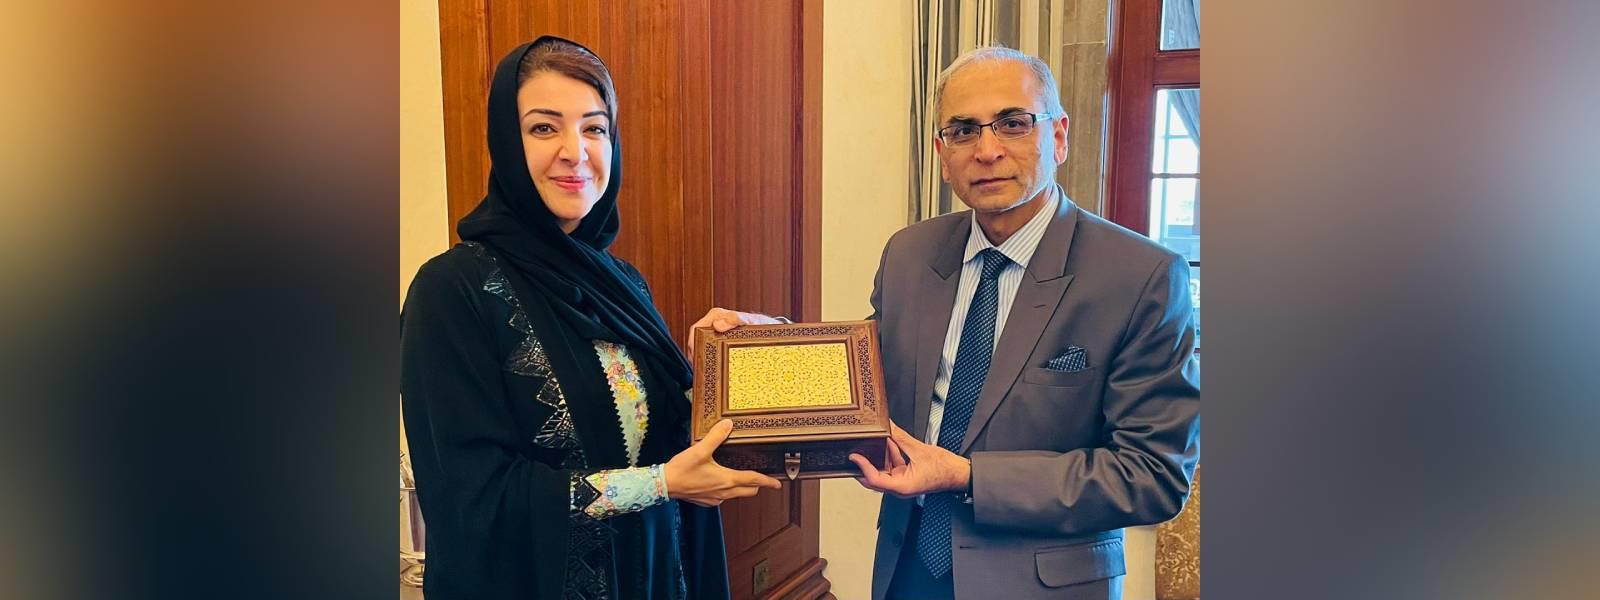 Foreign Secretary, Shri Vinay Kwatra met H.E. Ms. Reem Al Hashimy, Minister of State for International Cooperation of the United Arab Emirates in Abu Dhabi